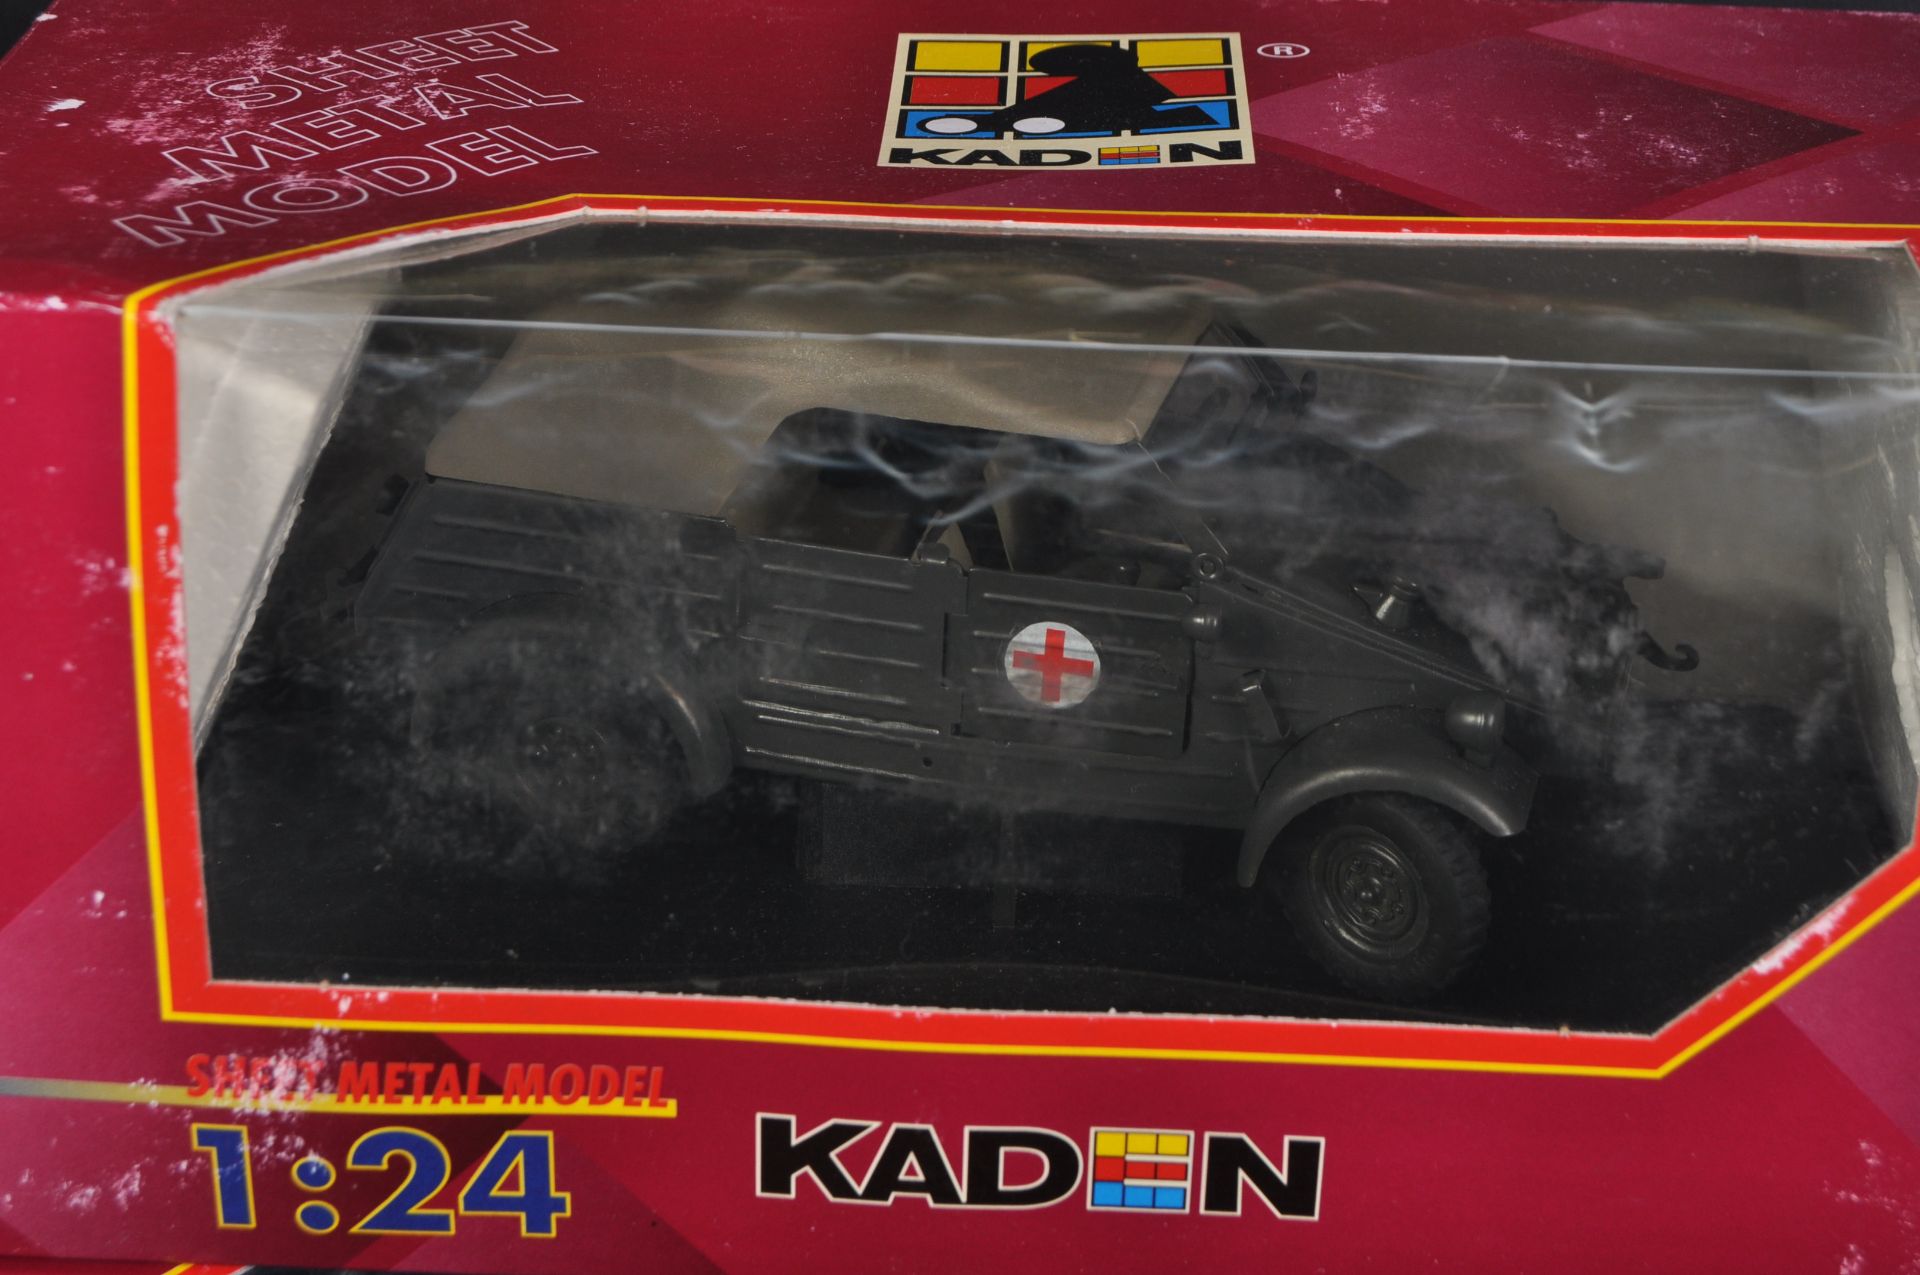 COLLECTION OF X3 KADEN 1/24 SCALE DIECAST MILITARY MODELS - Image 2 of 6